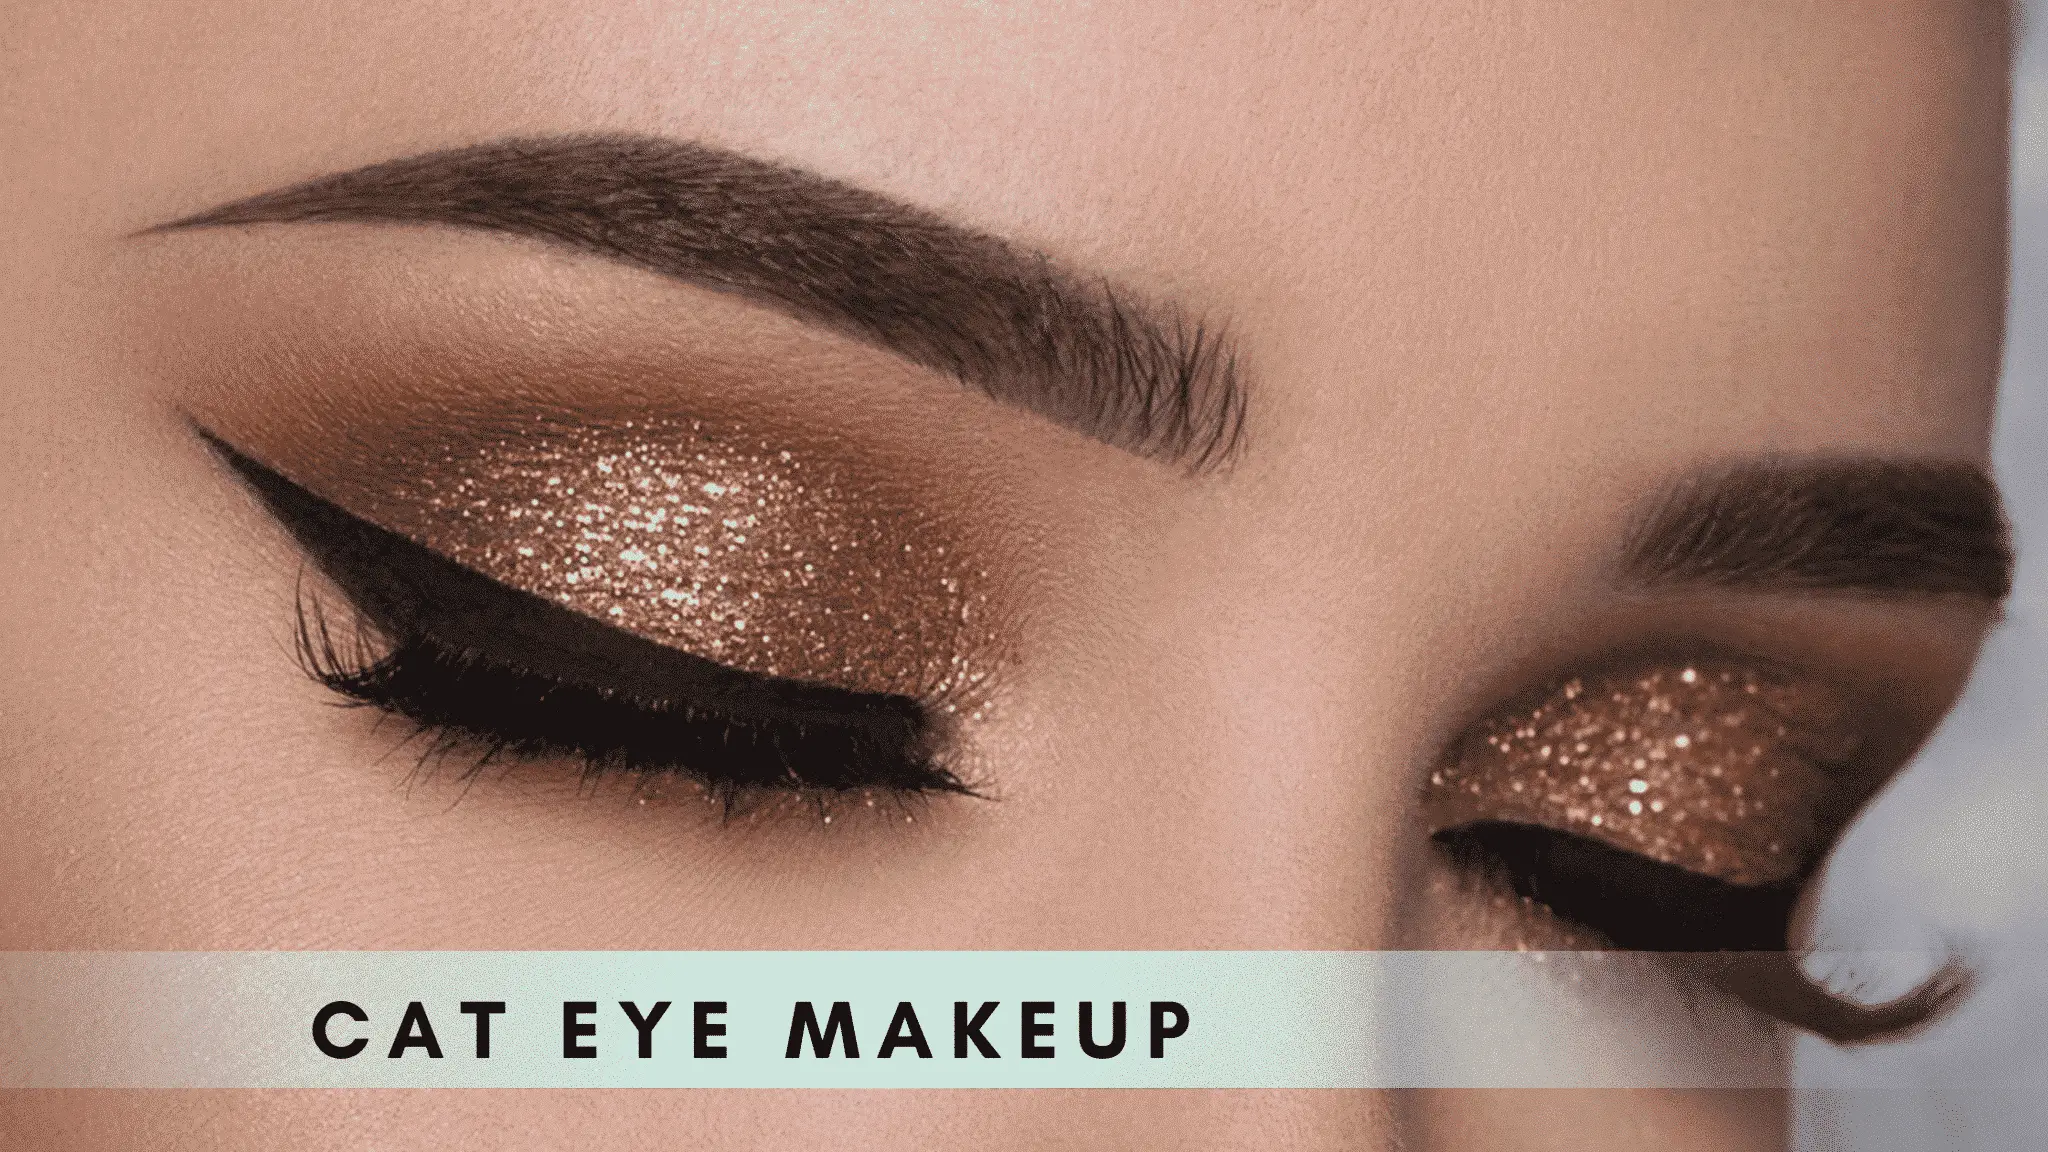 Cat Eye Makeup – 5 Innovative Ways To Wear The Look